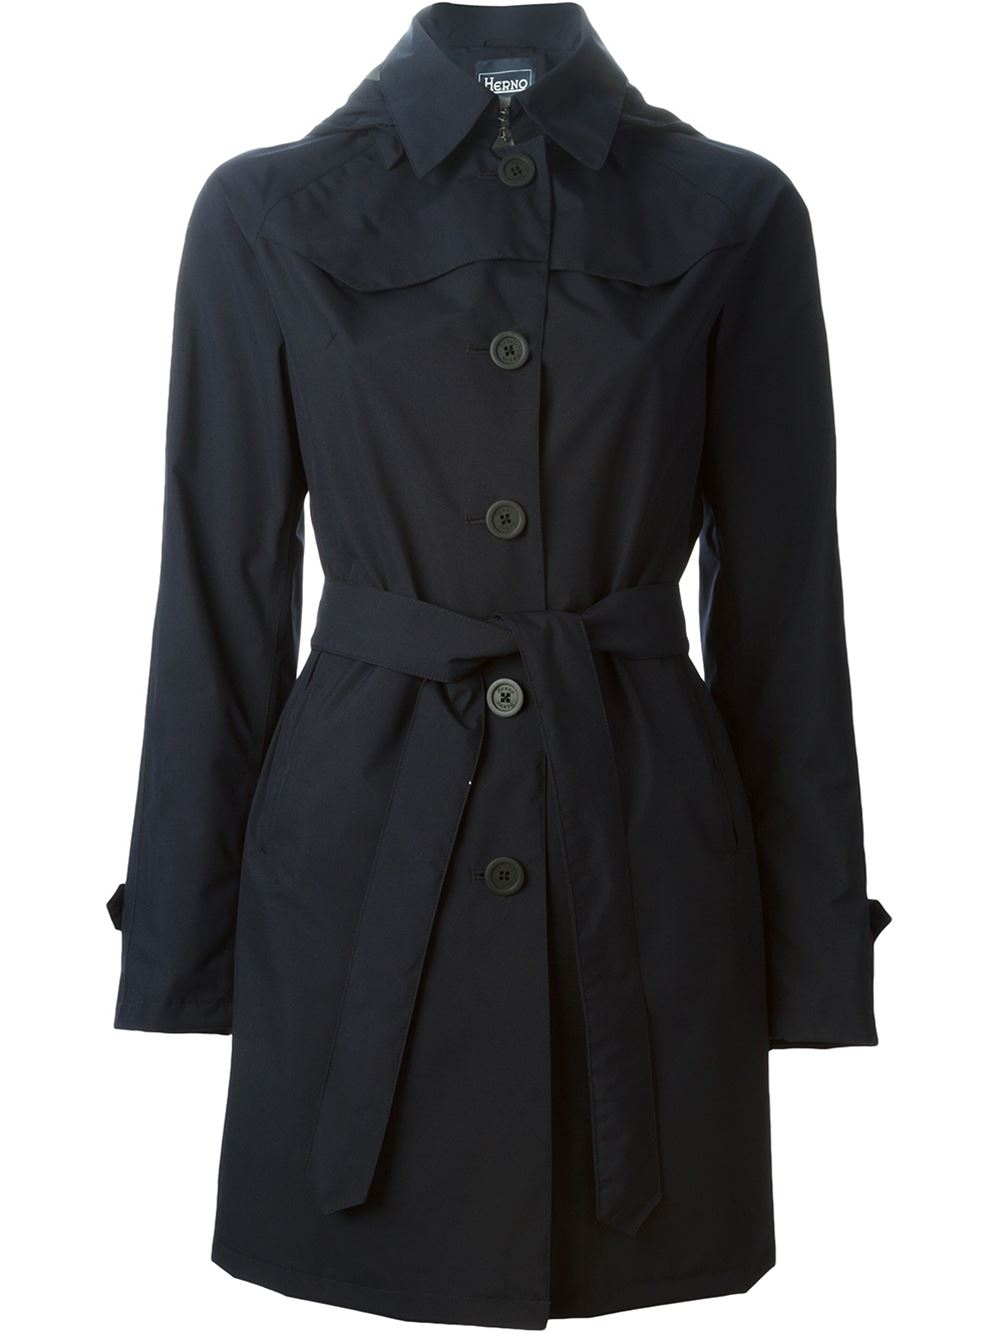 Herno Single Breasted Trench Coat in Blue | Lyst